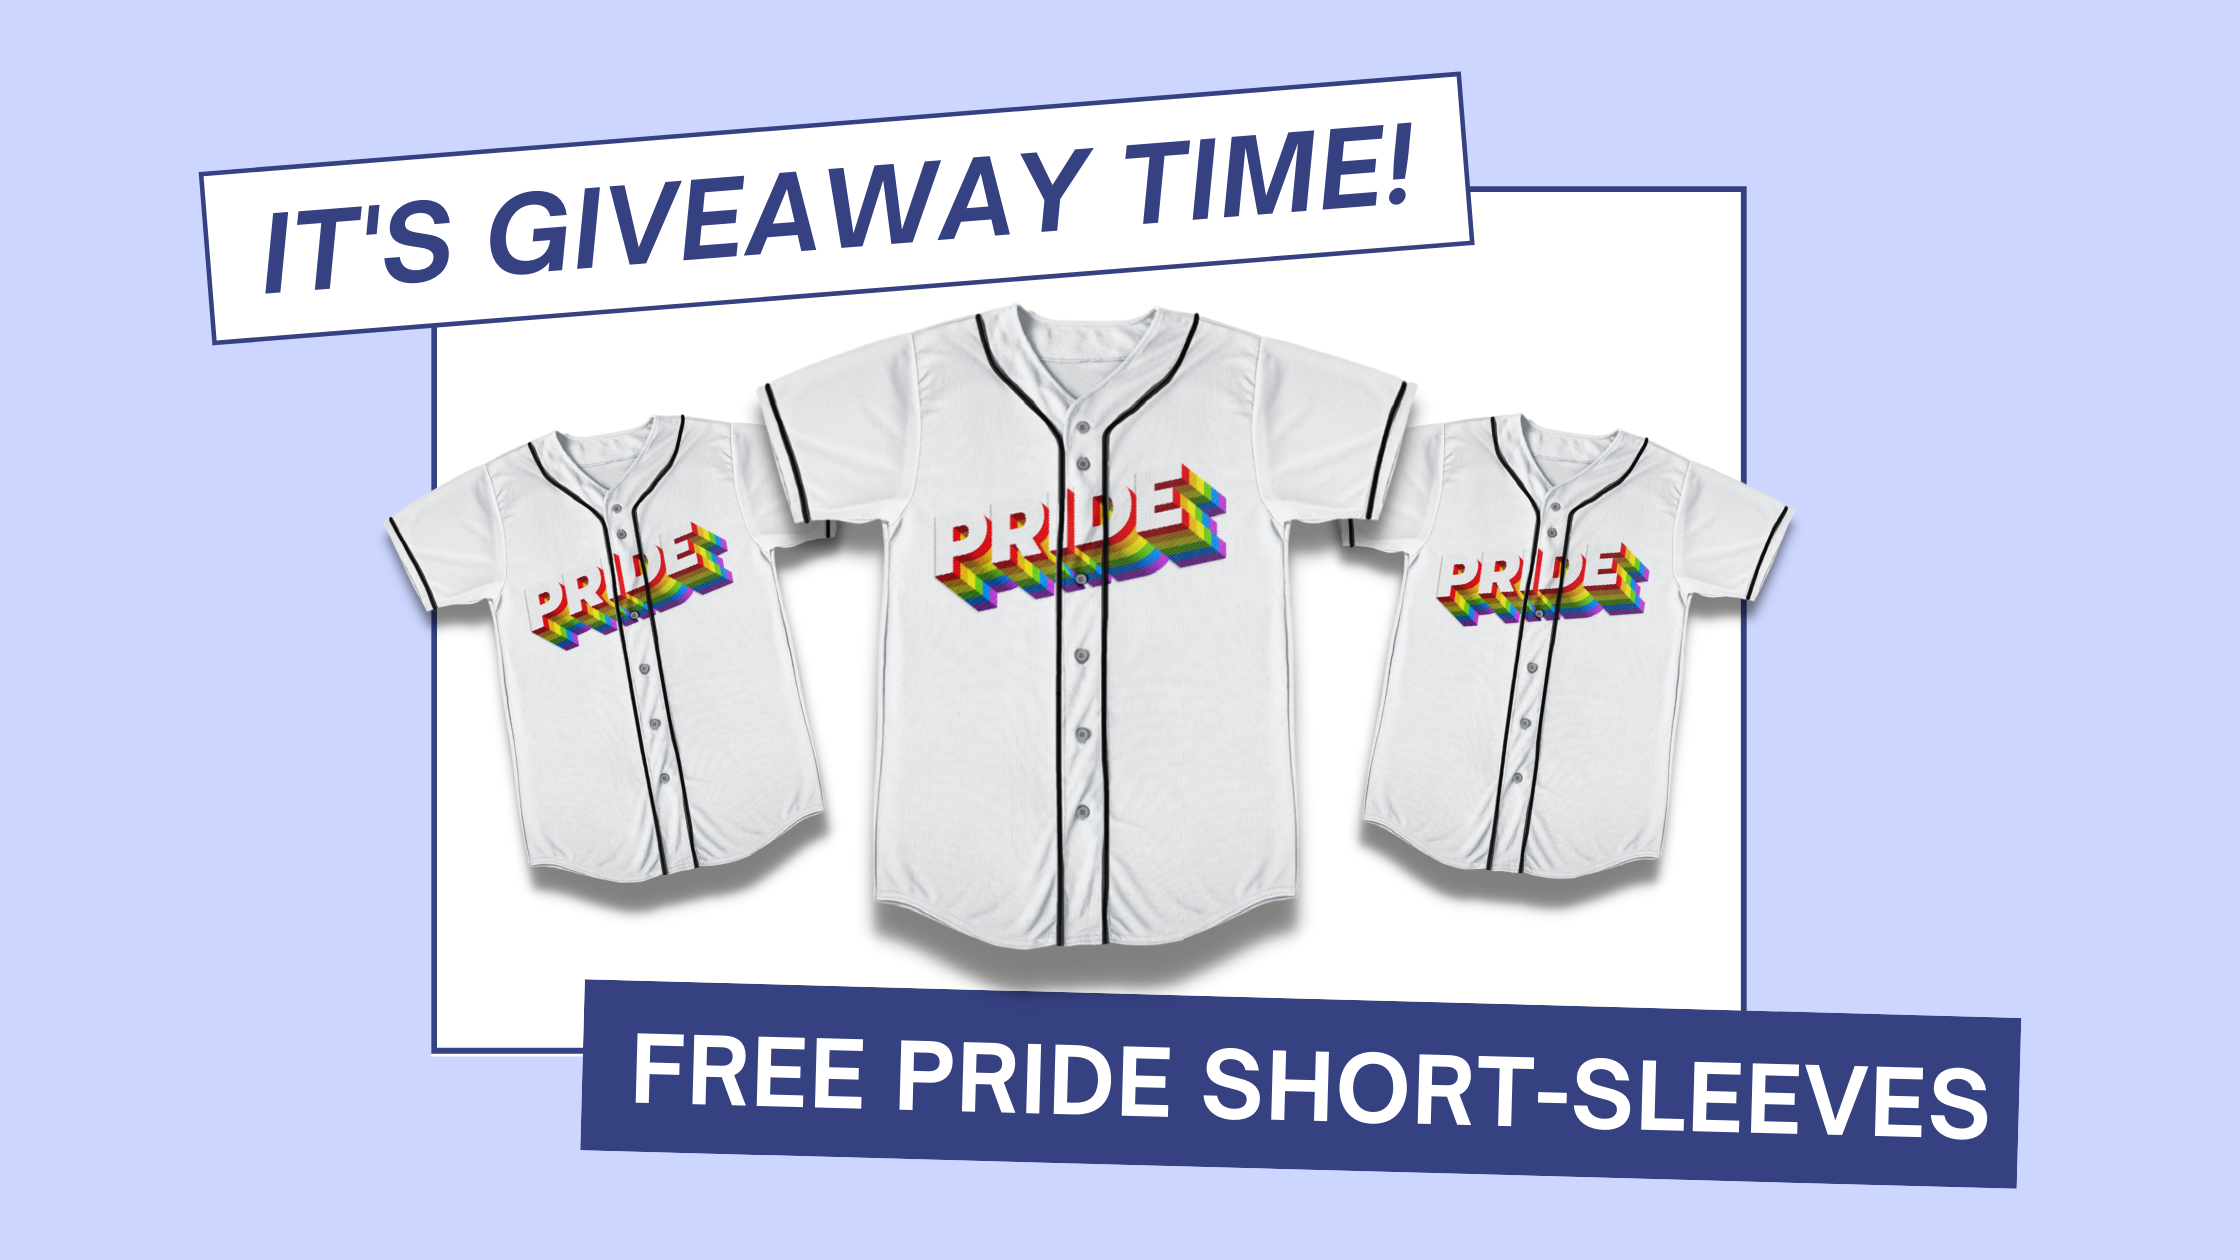 Want a FREE Pride Short-Sleeve Jersey?!